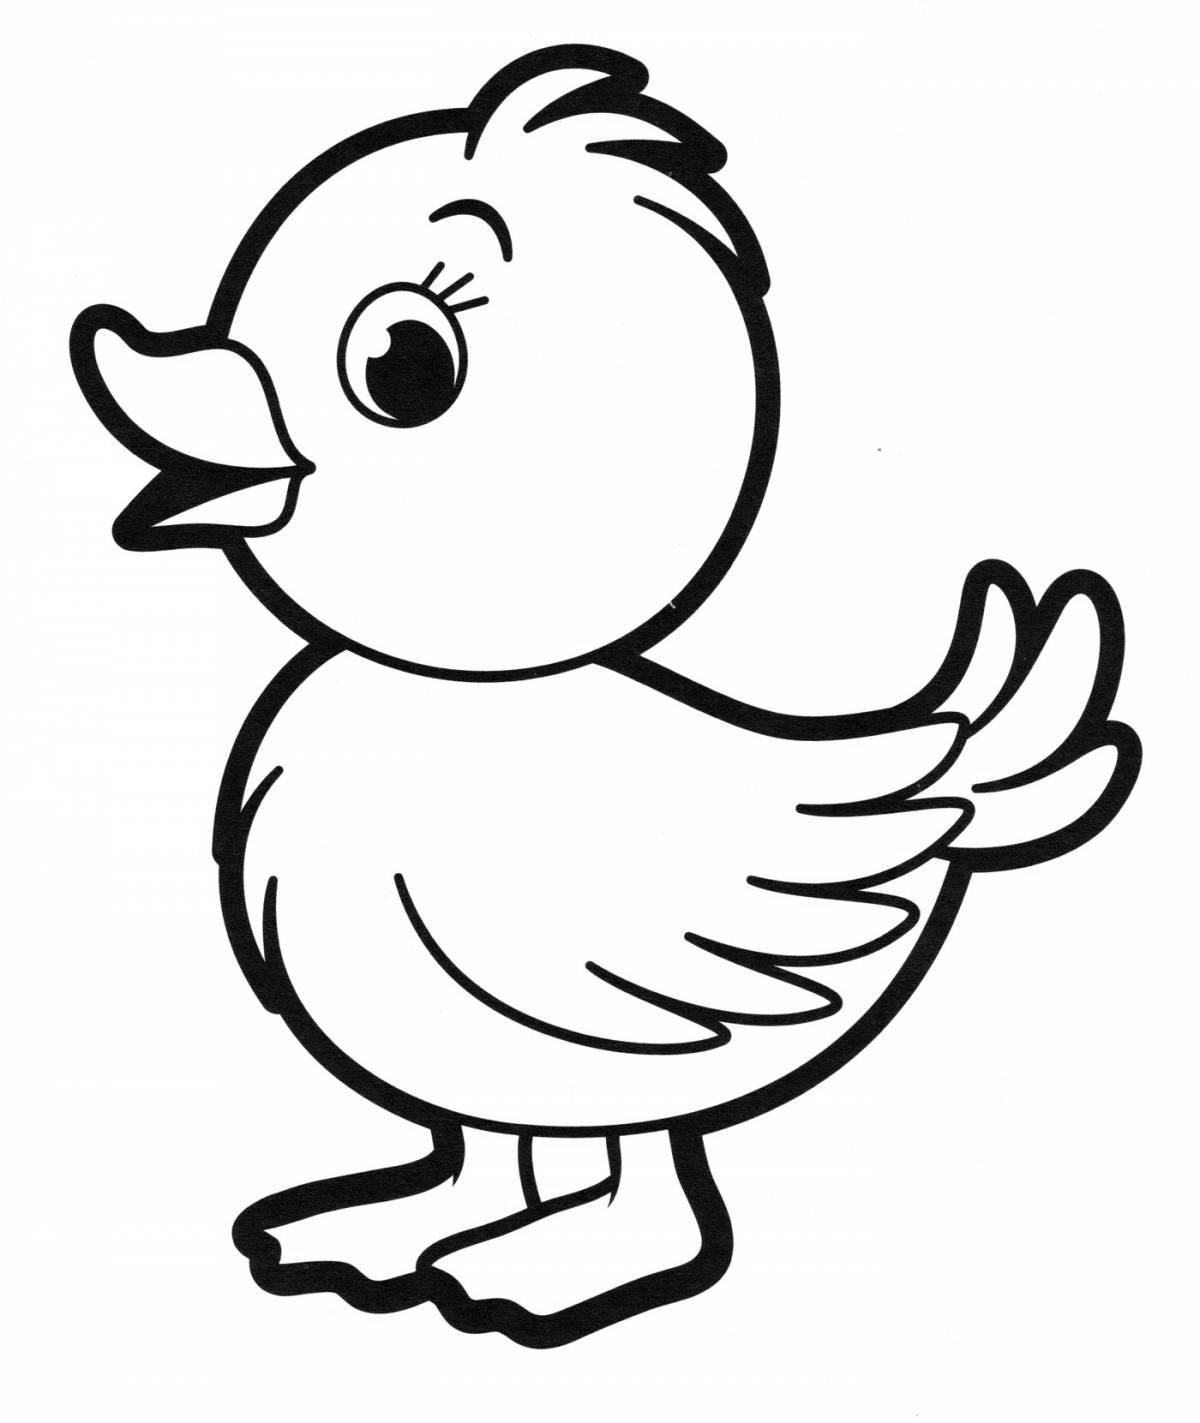 Colorful chick coloring page for 3-4 year olds